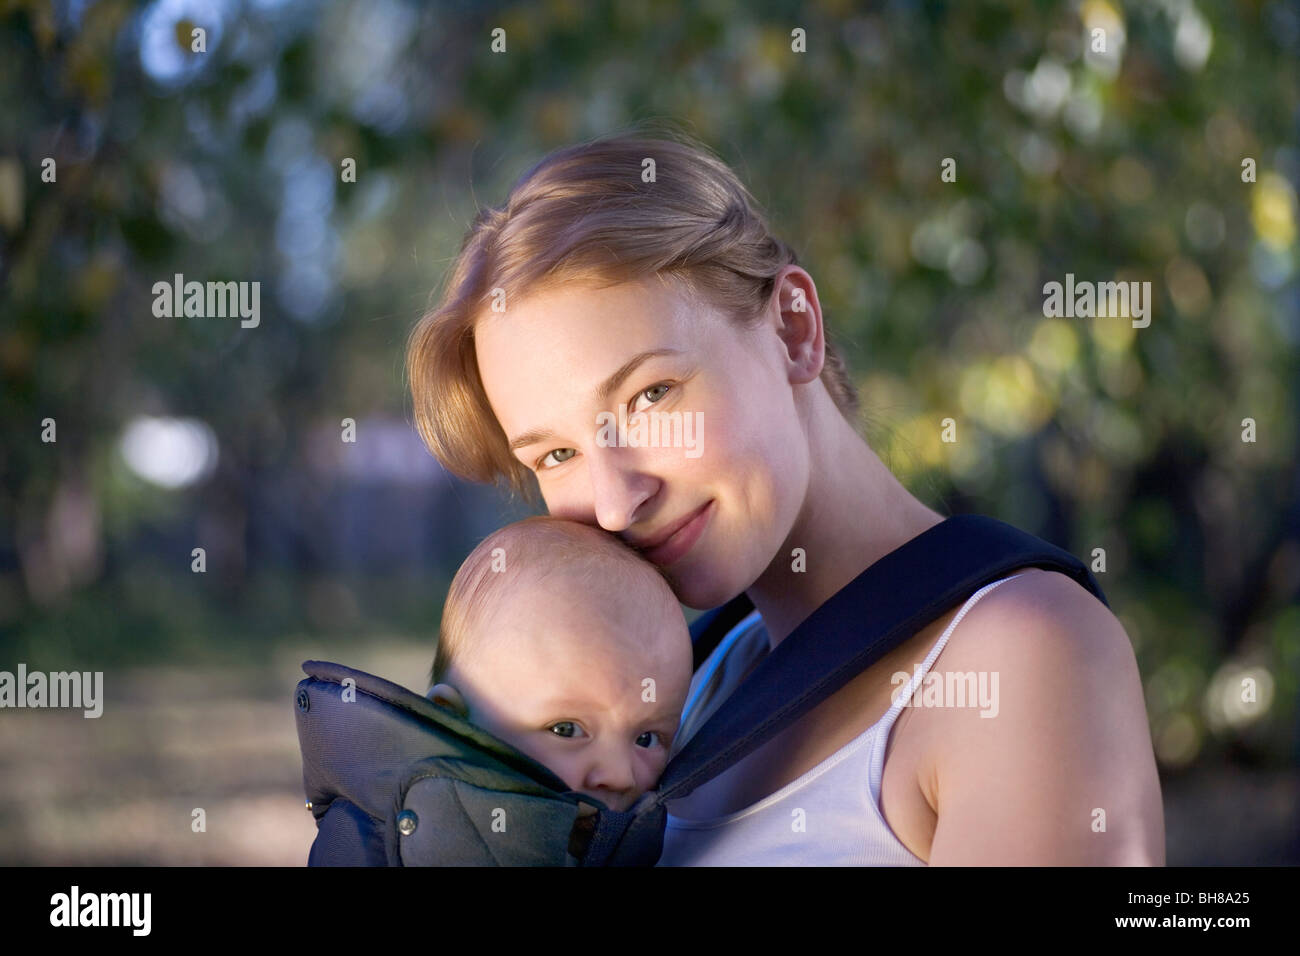 A mother with her baby in a baby carrier, portrait Stock Photo